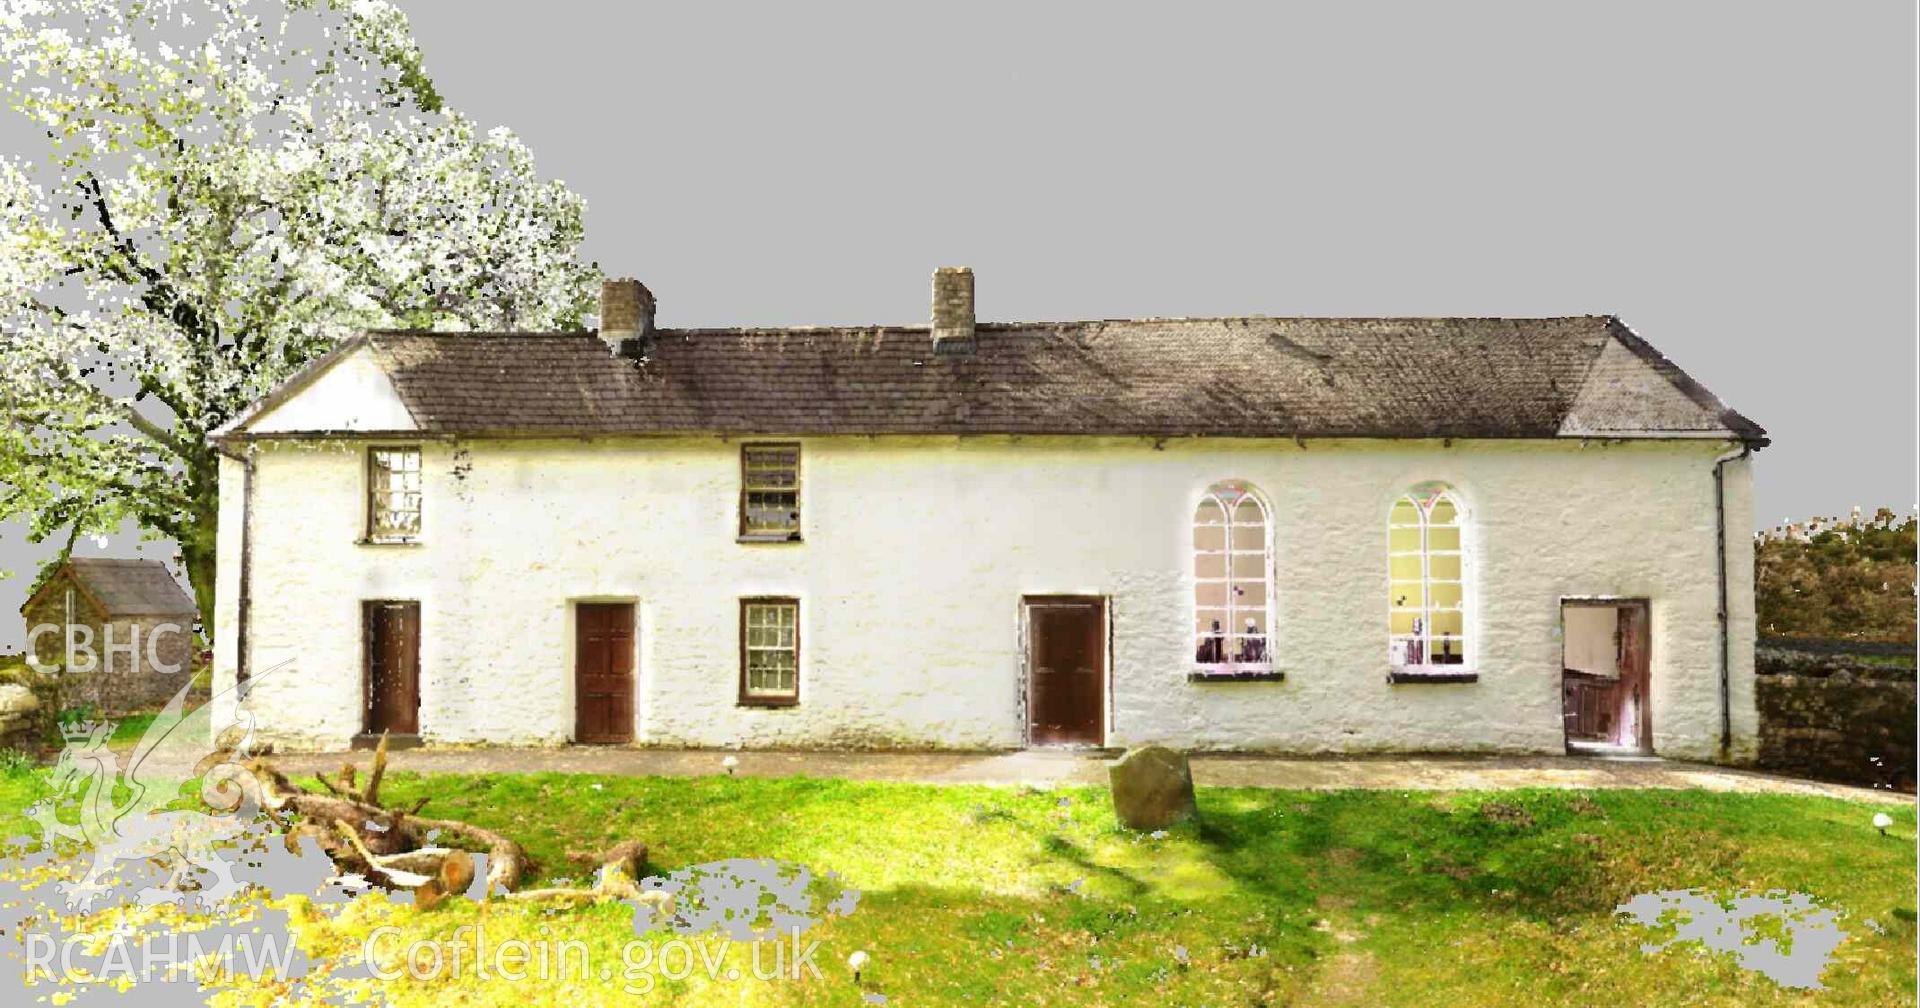 Front elevation view of the chapel, derived from laser scan point cloud data. Part of Terrestrial Laser Scanning Survey archive for Capel Soar-y-Mynydd, carried out by Dr Jayne Kamintzis of RCAHMW on 9 May 2023.